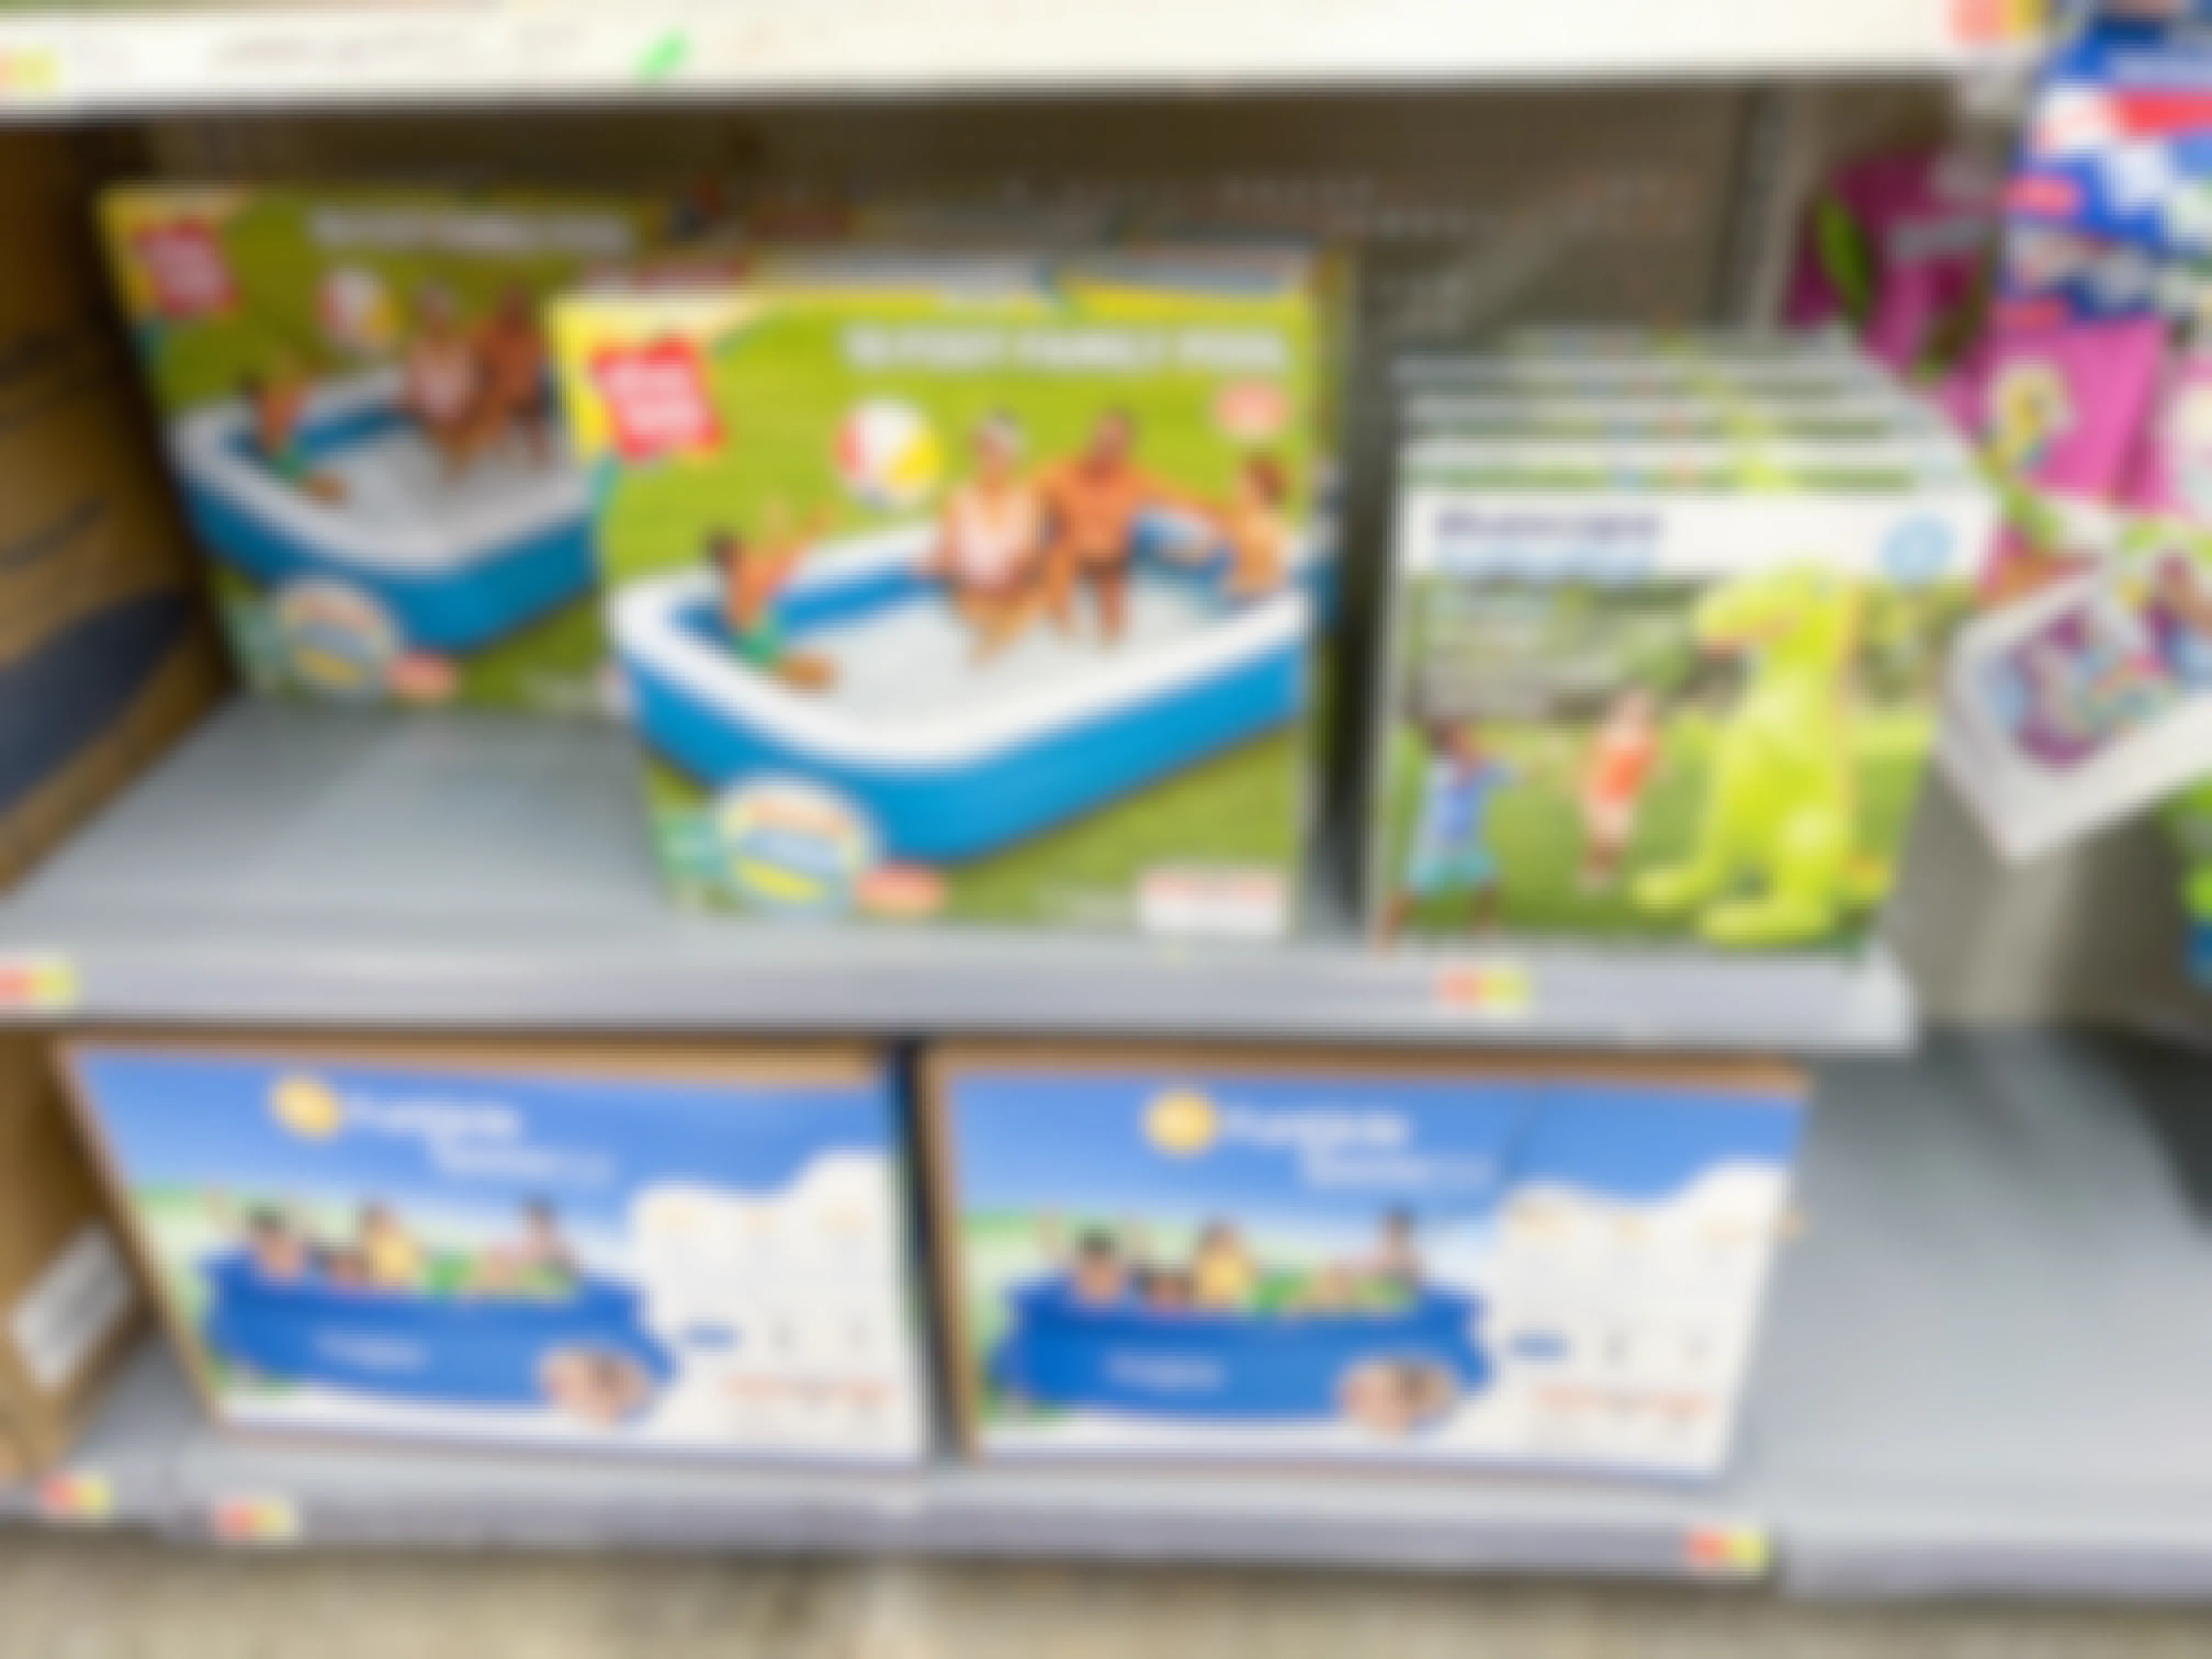 10 ft family inflatable pool boxes at Walmart